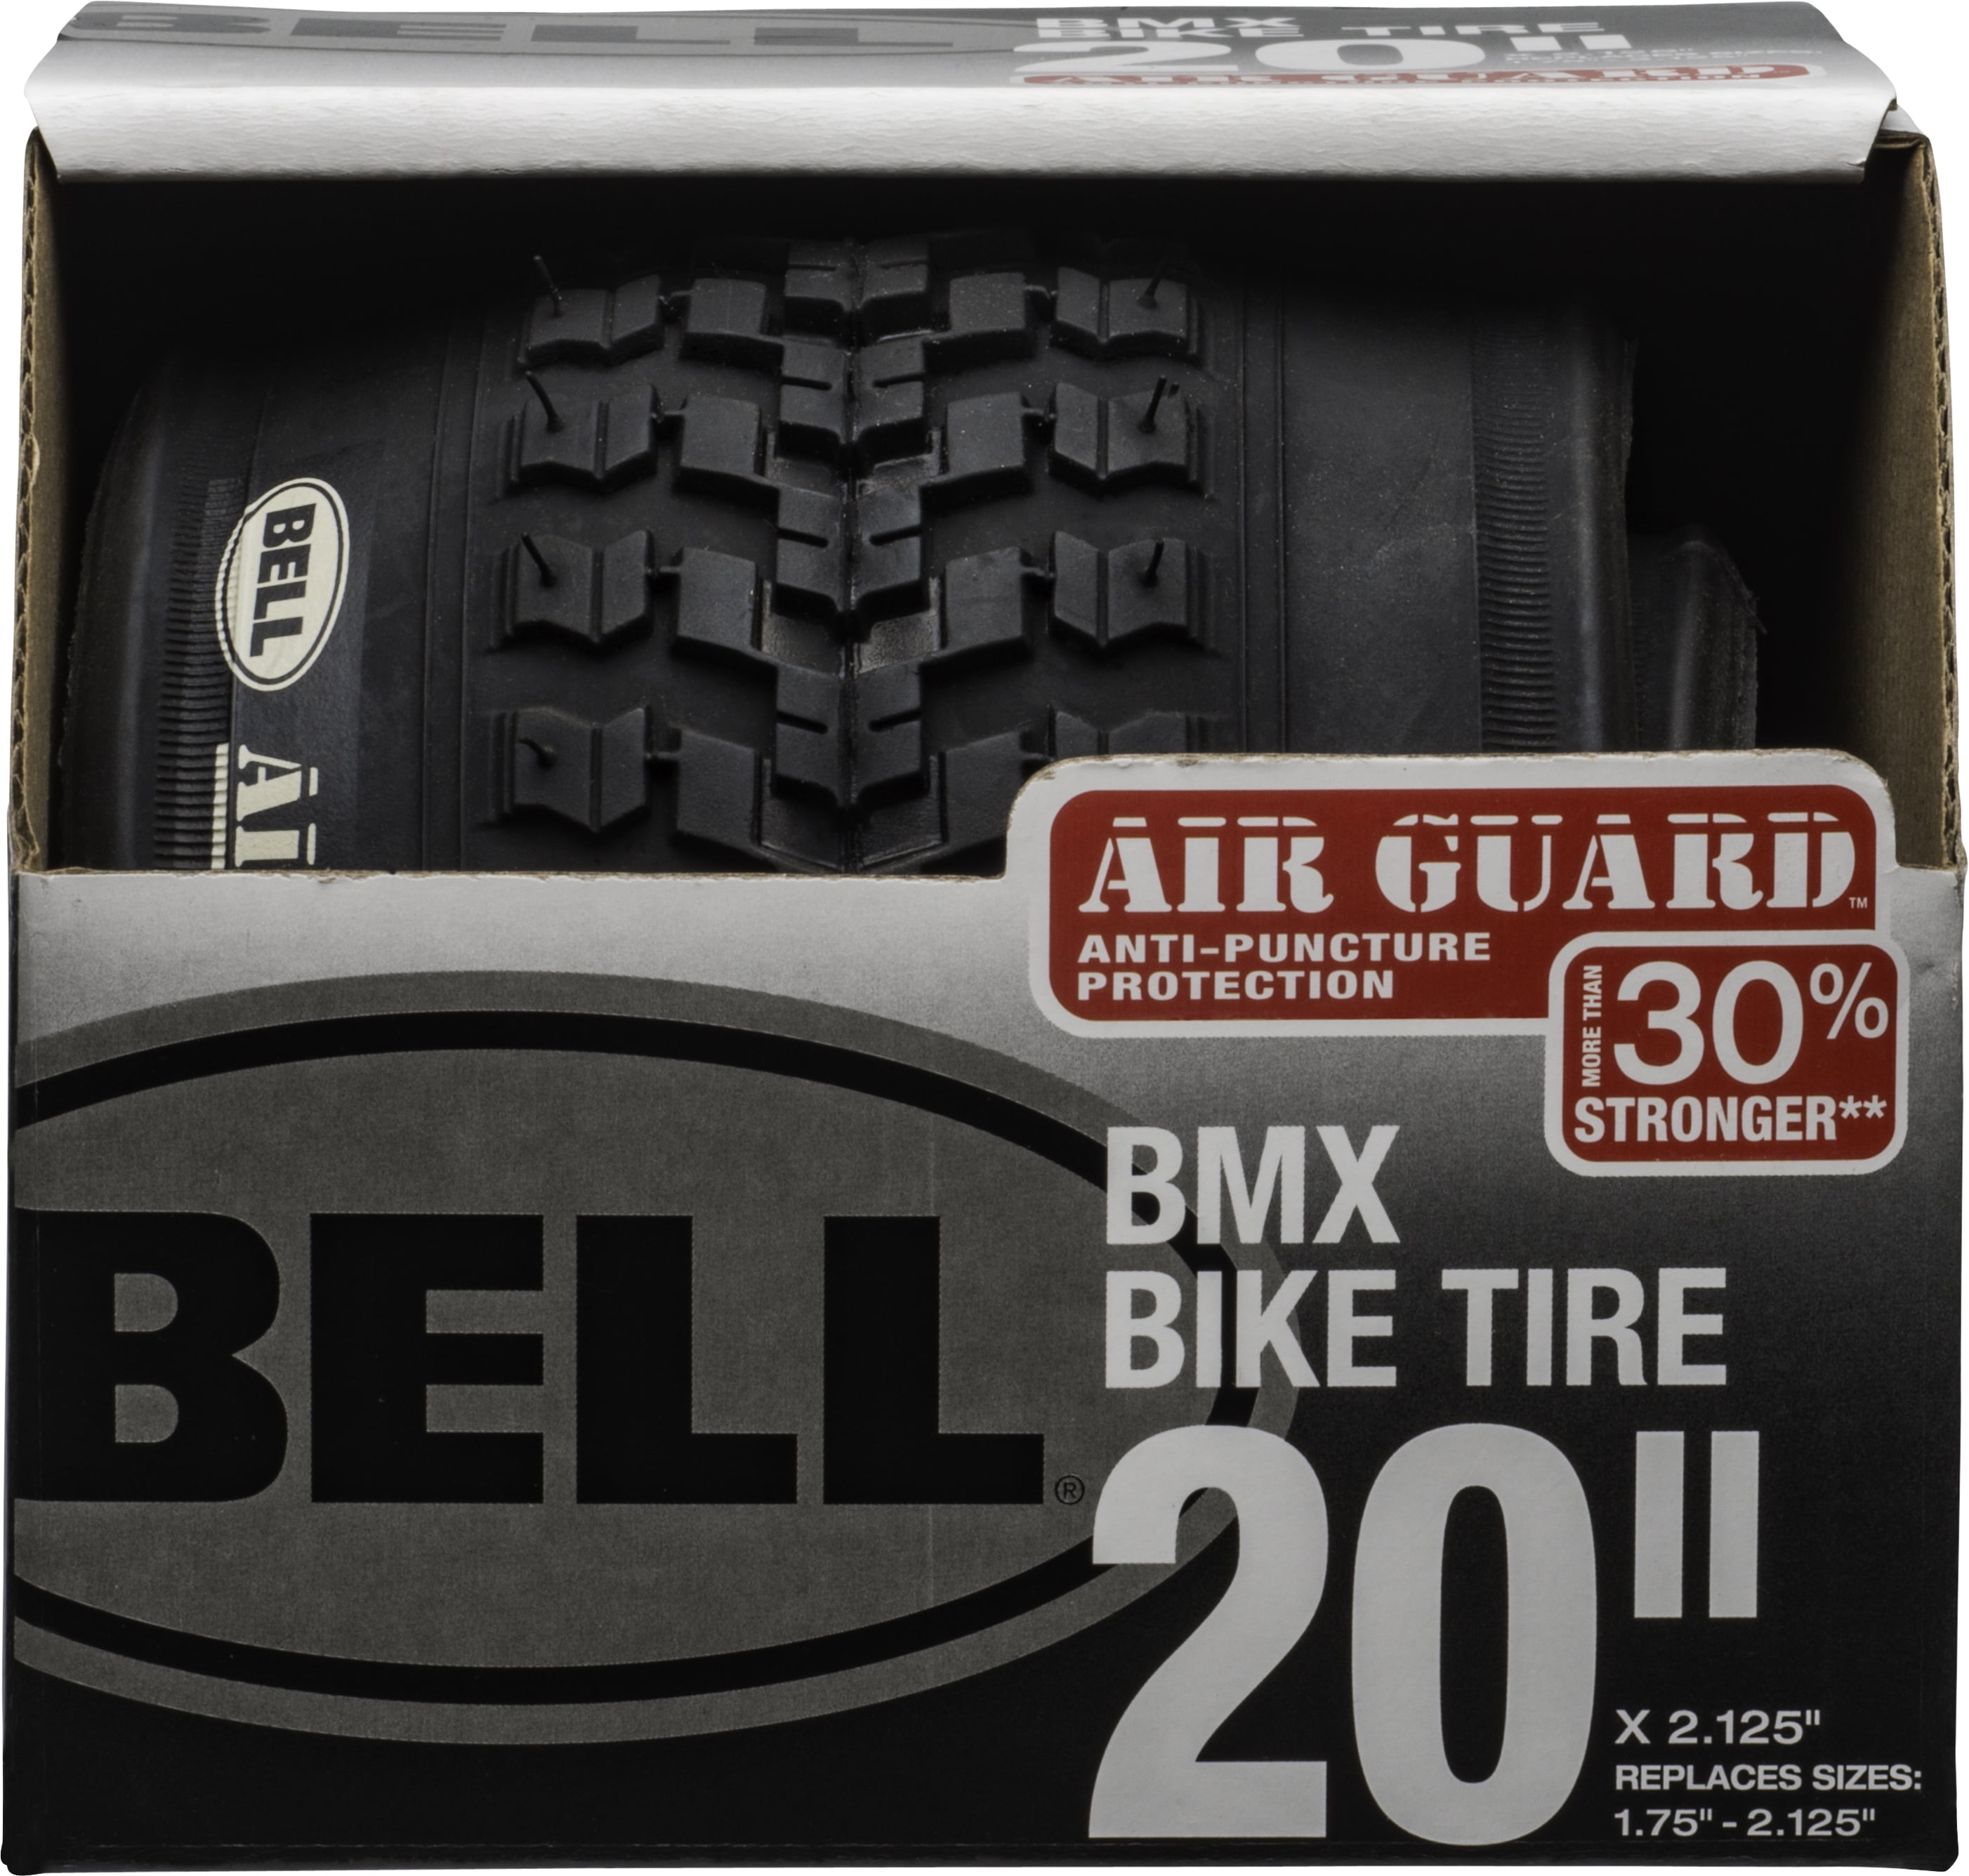 Details about   Bell Freestyle BMX Bike Tire 20" x 2.0" Black Air Guard Anti-Puncture New in Box 